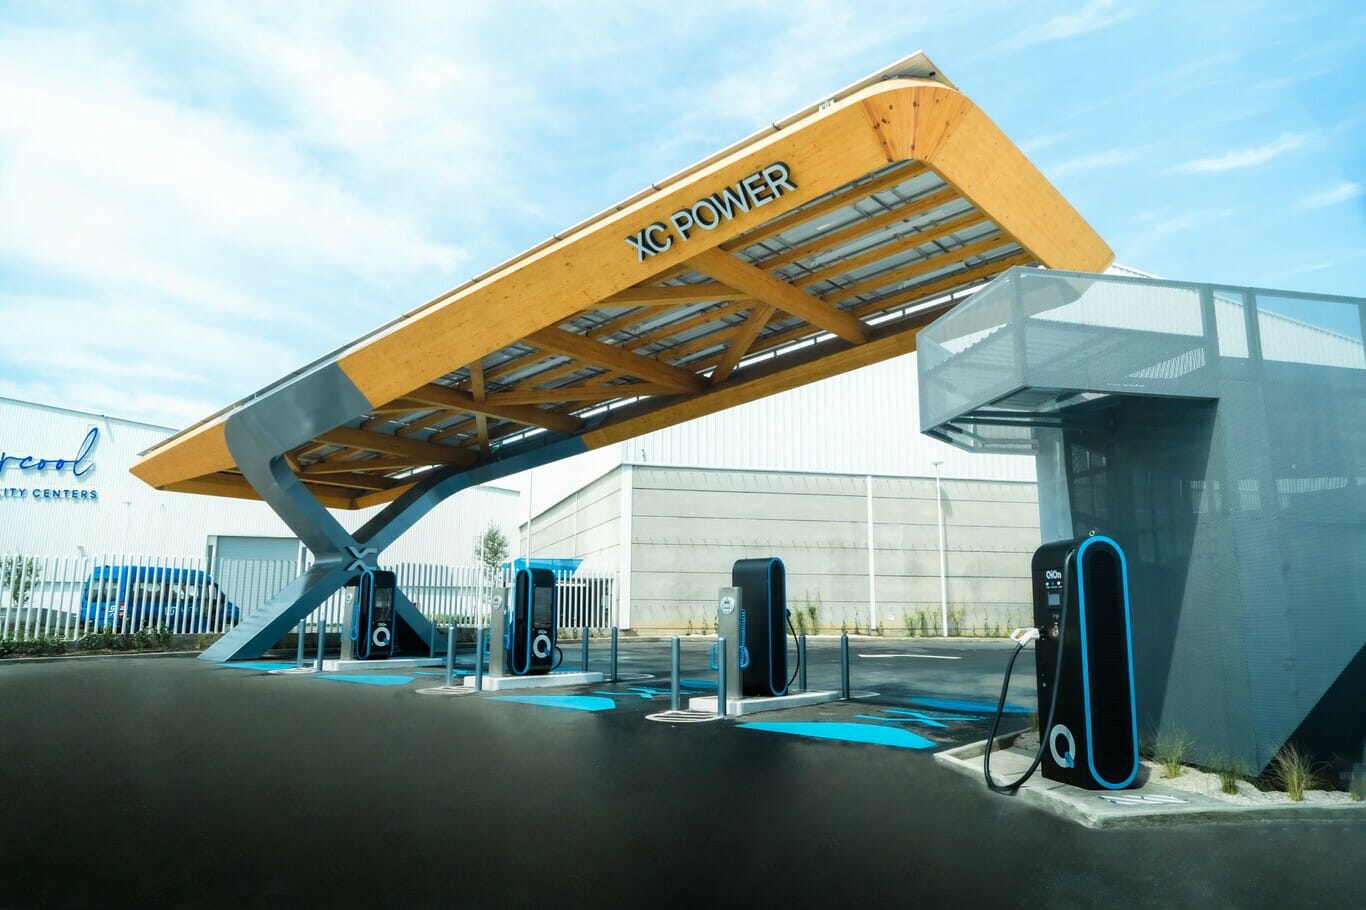 EV charging station,Puebla,Mexico,electric vehicle,1 MW charger,fast charging,MegaThunder,Supercool Mobility Center,DC battery charging,QiOn,QiOn charger,DC MegaThunder,DC MegaThunder EV charger